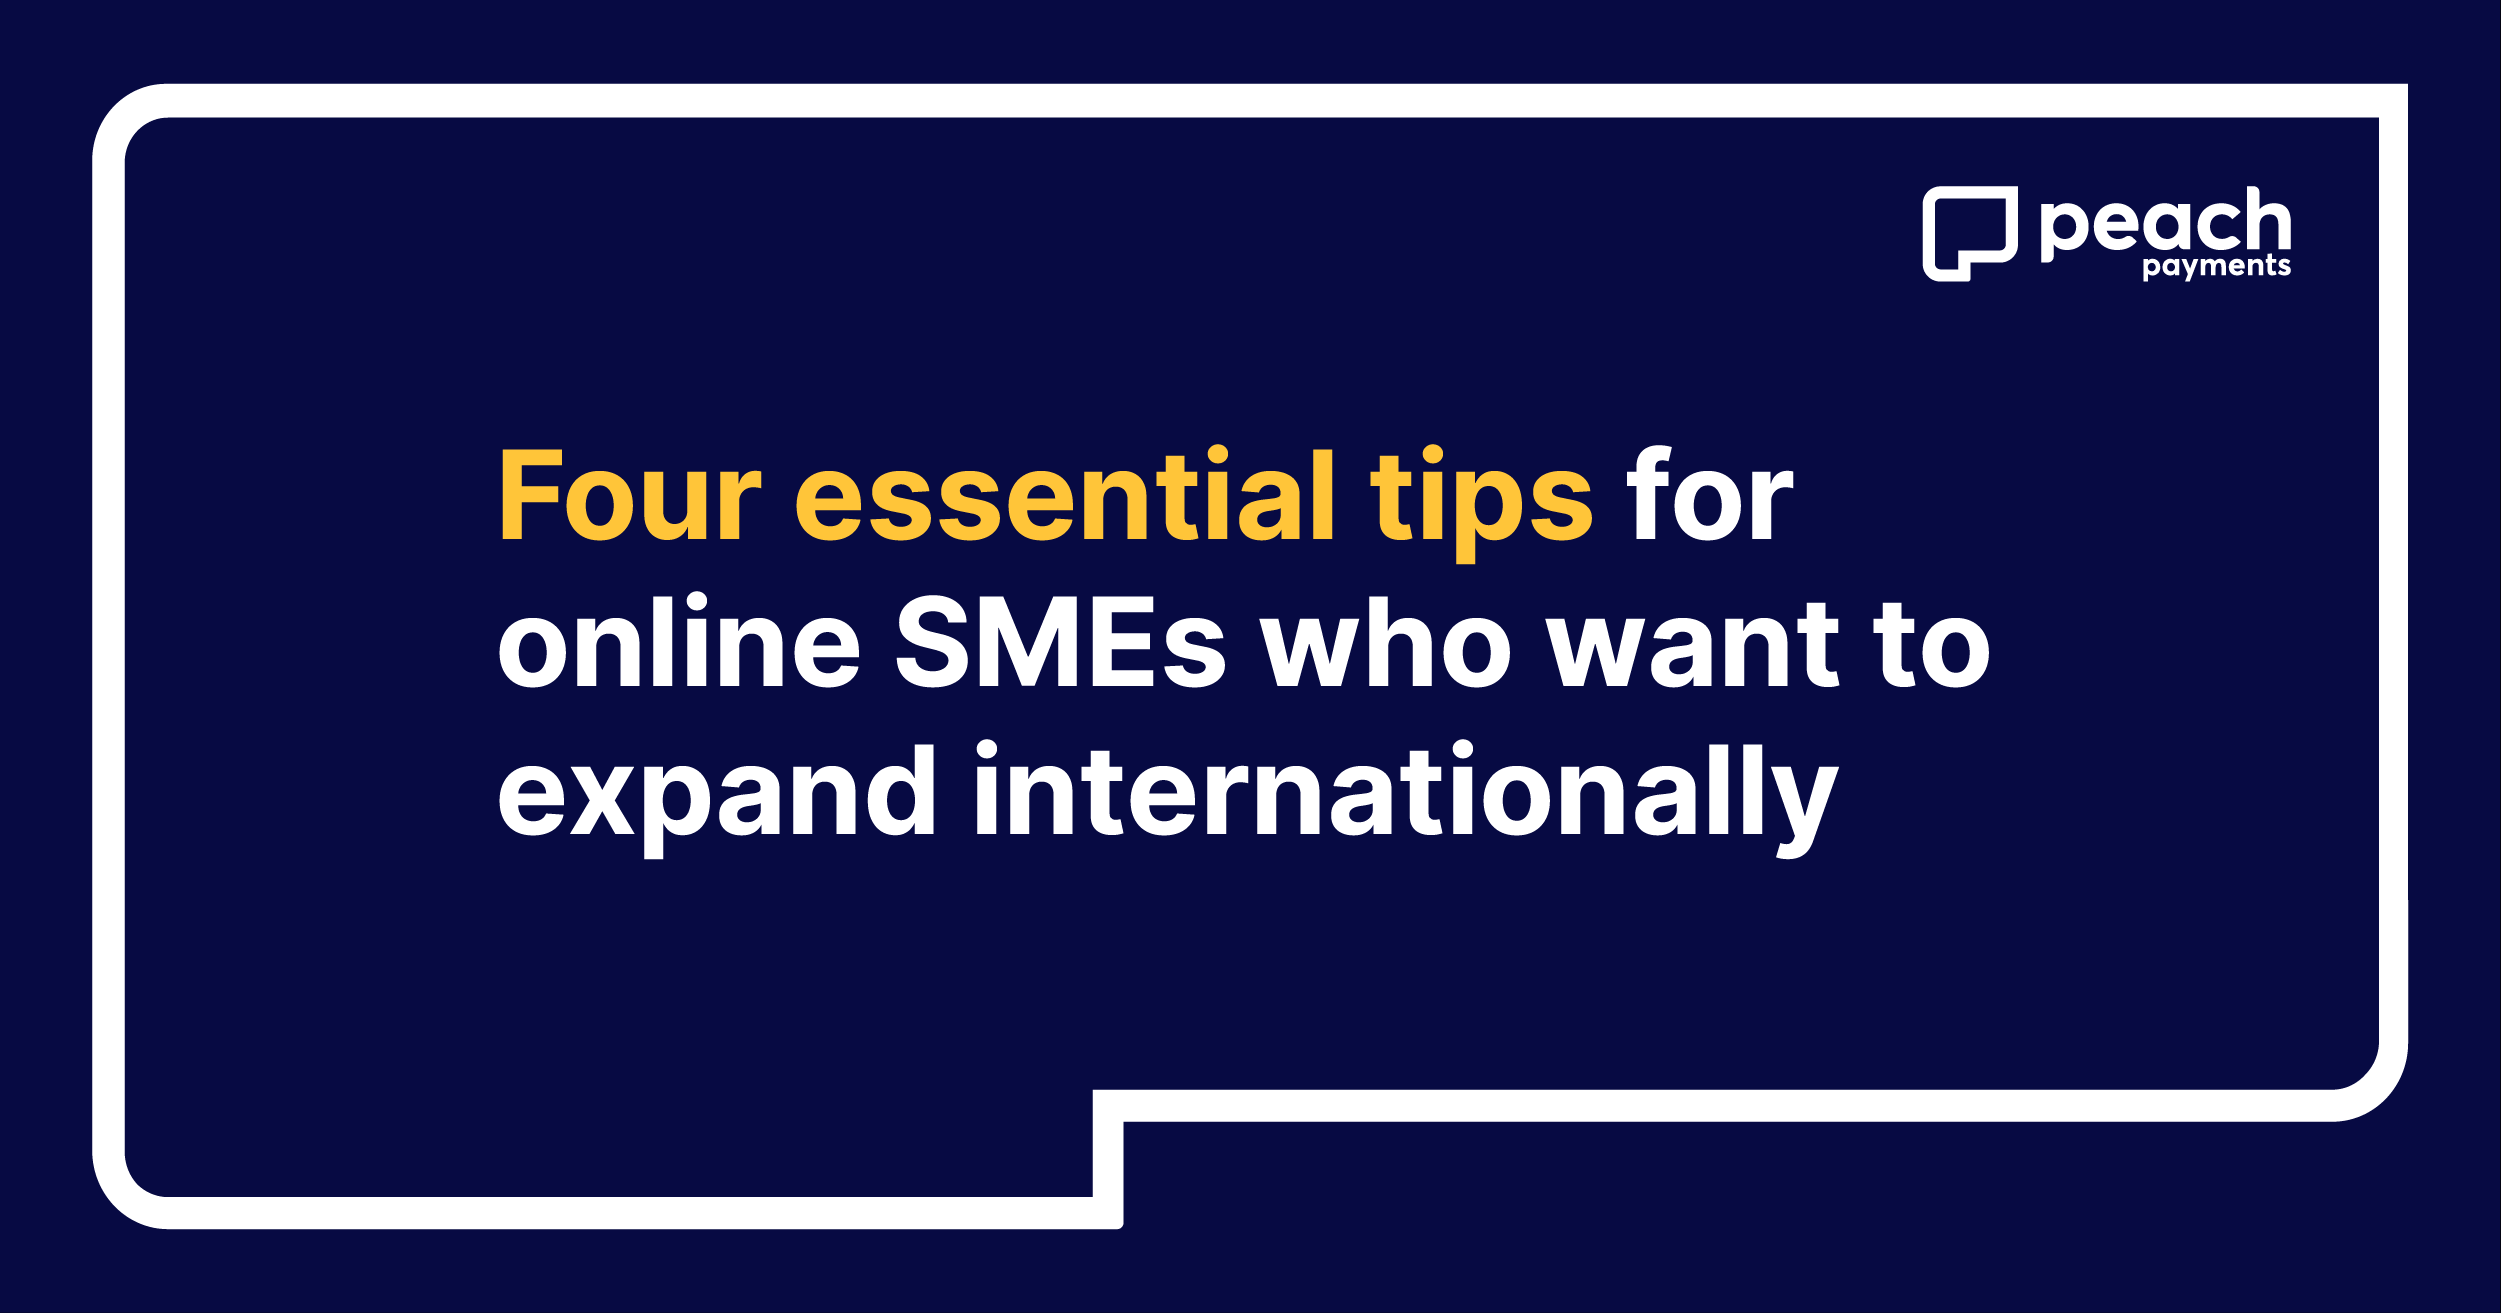 Four essential tips for online SMEs who want to expand internationally